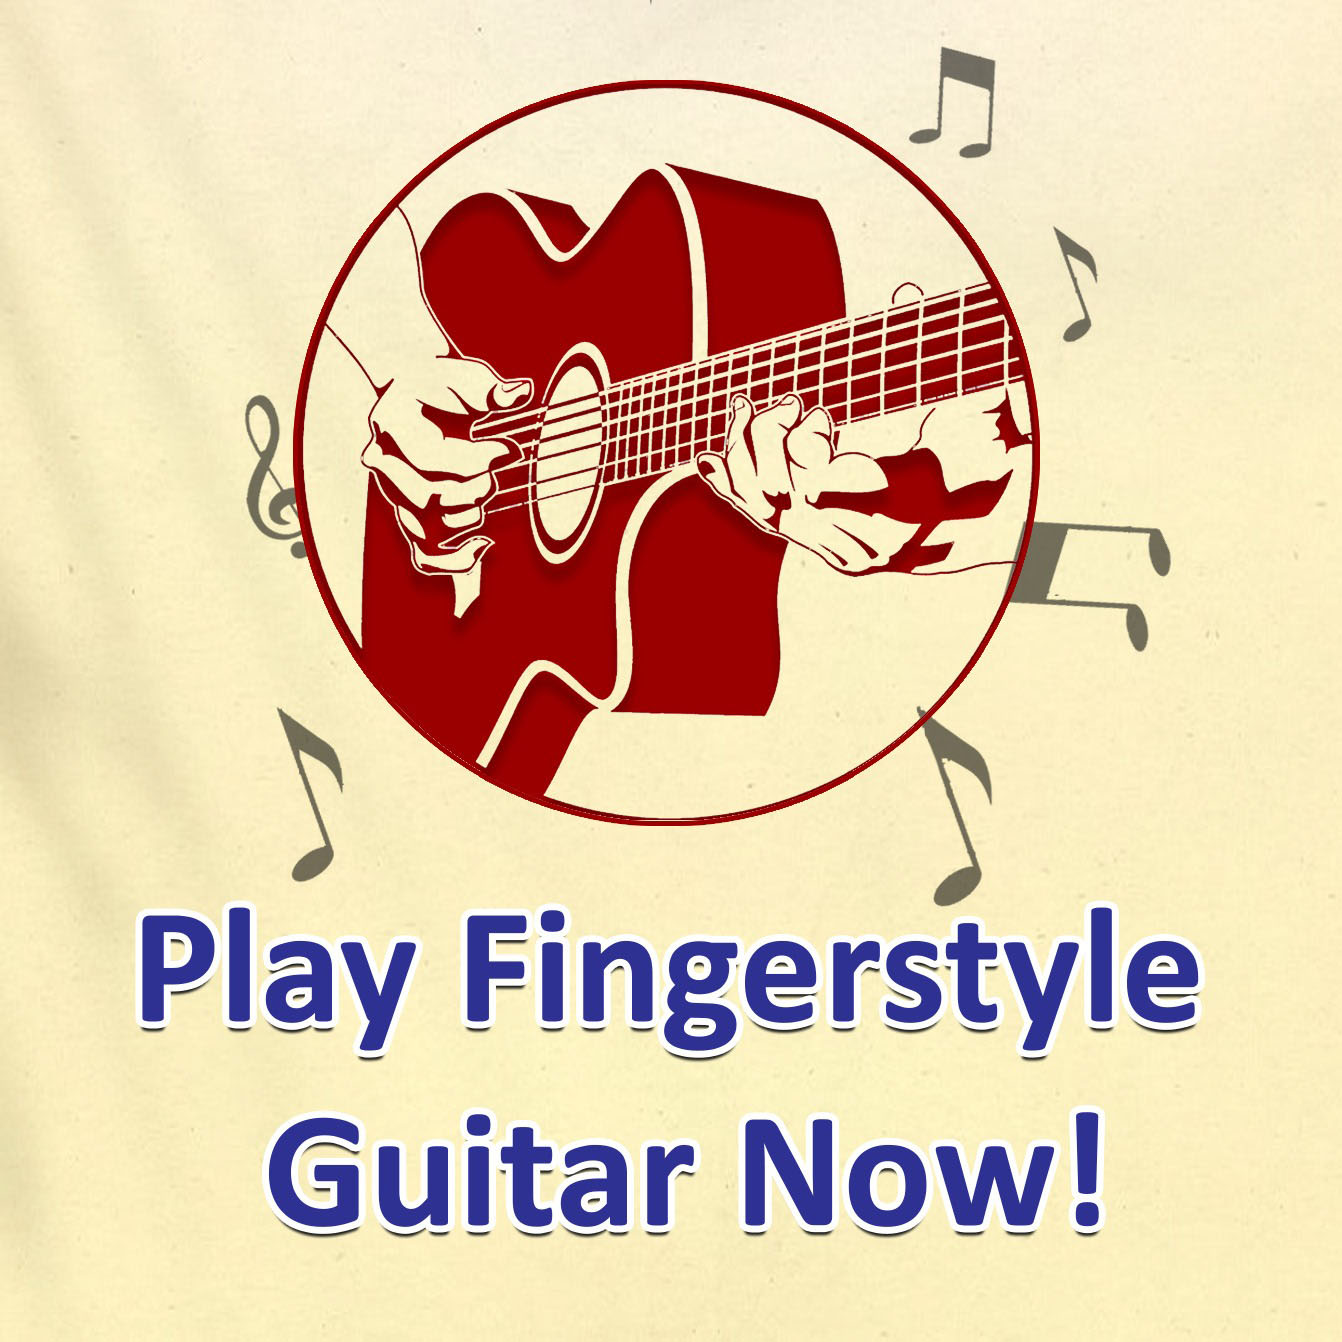 Play Fingerstyle Guitar Now!